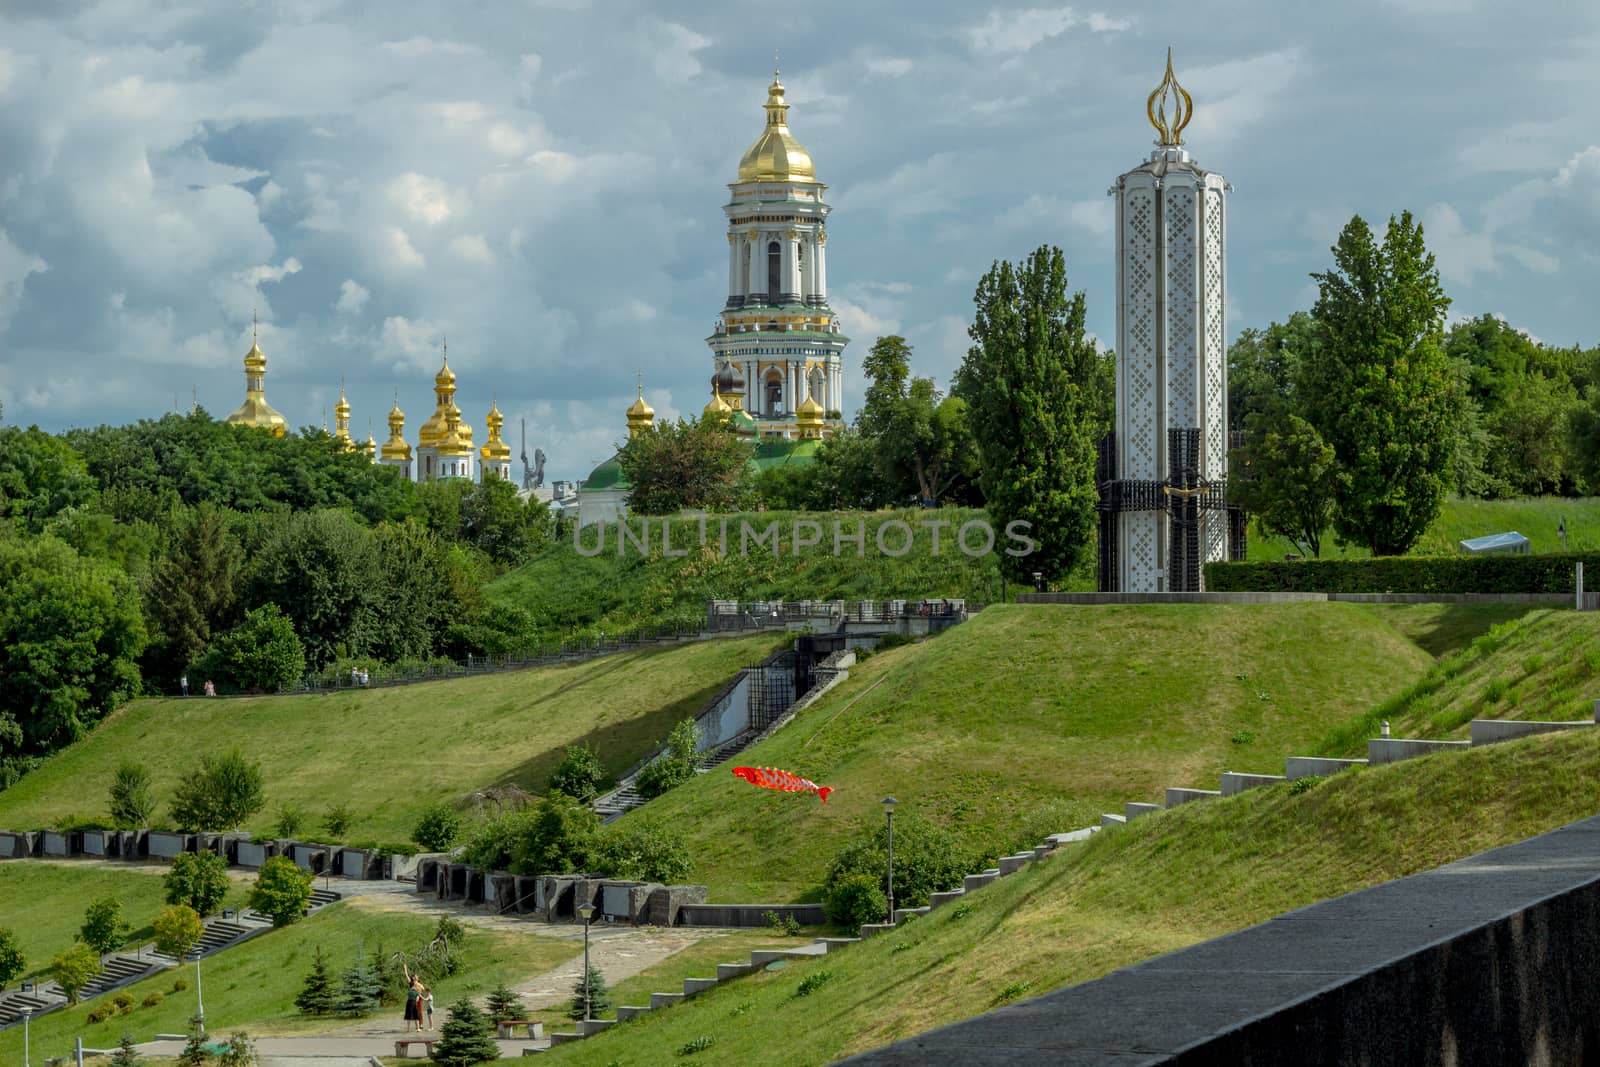 Glory park on green hills with memorial and monastery by VeraVerano